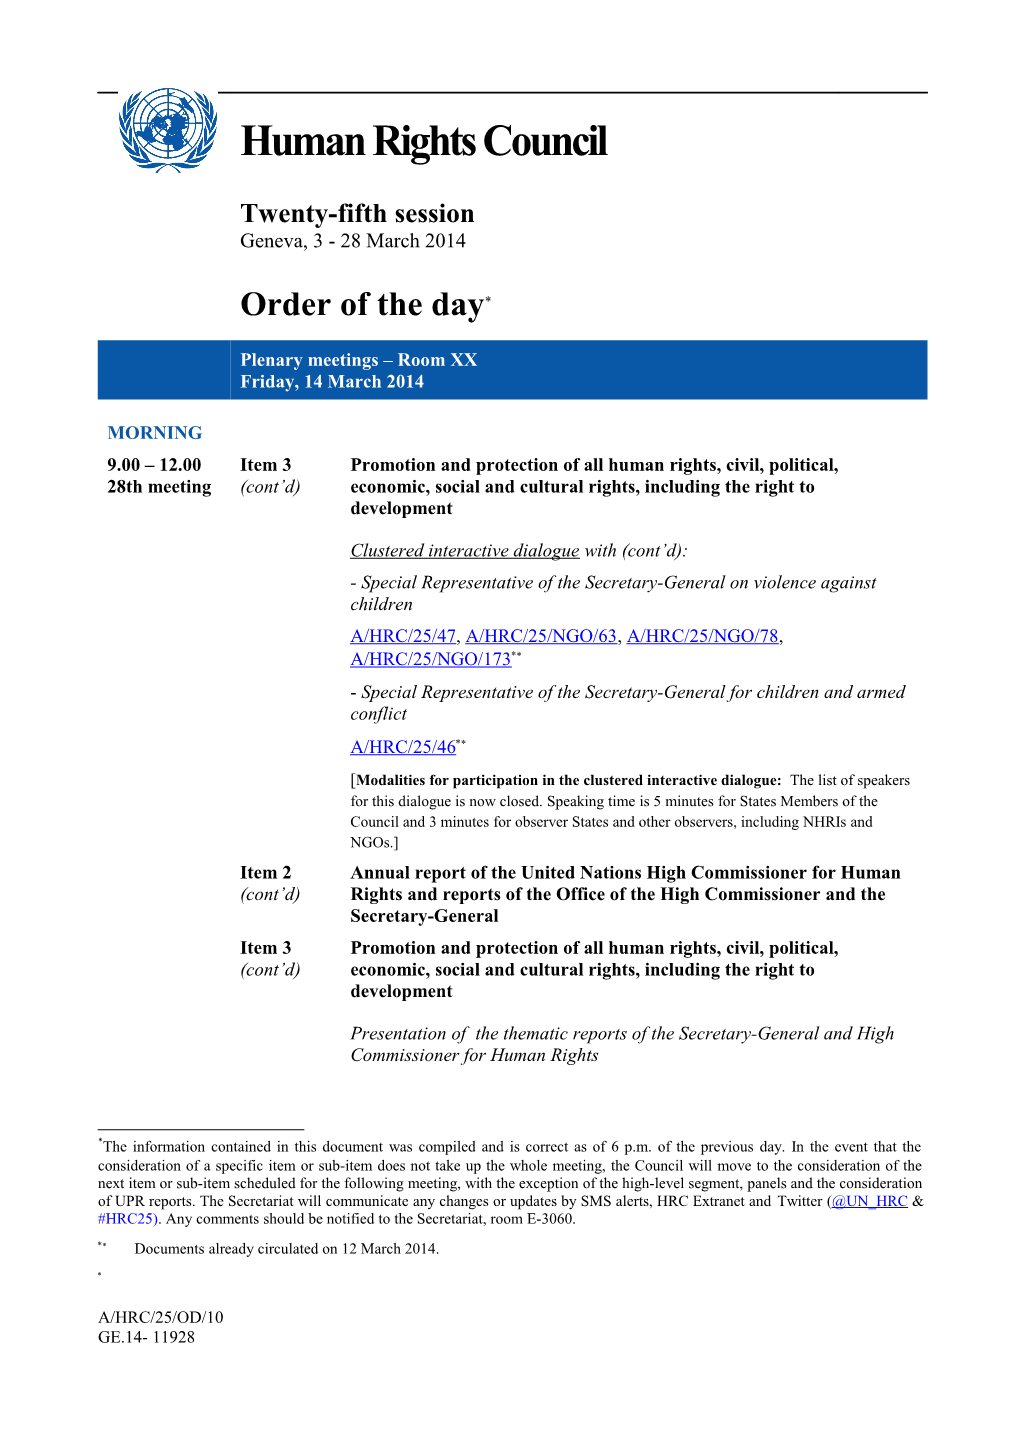 Order of the Day, Friday, 14 March 2014 in English (Word)